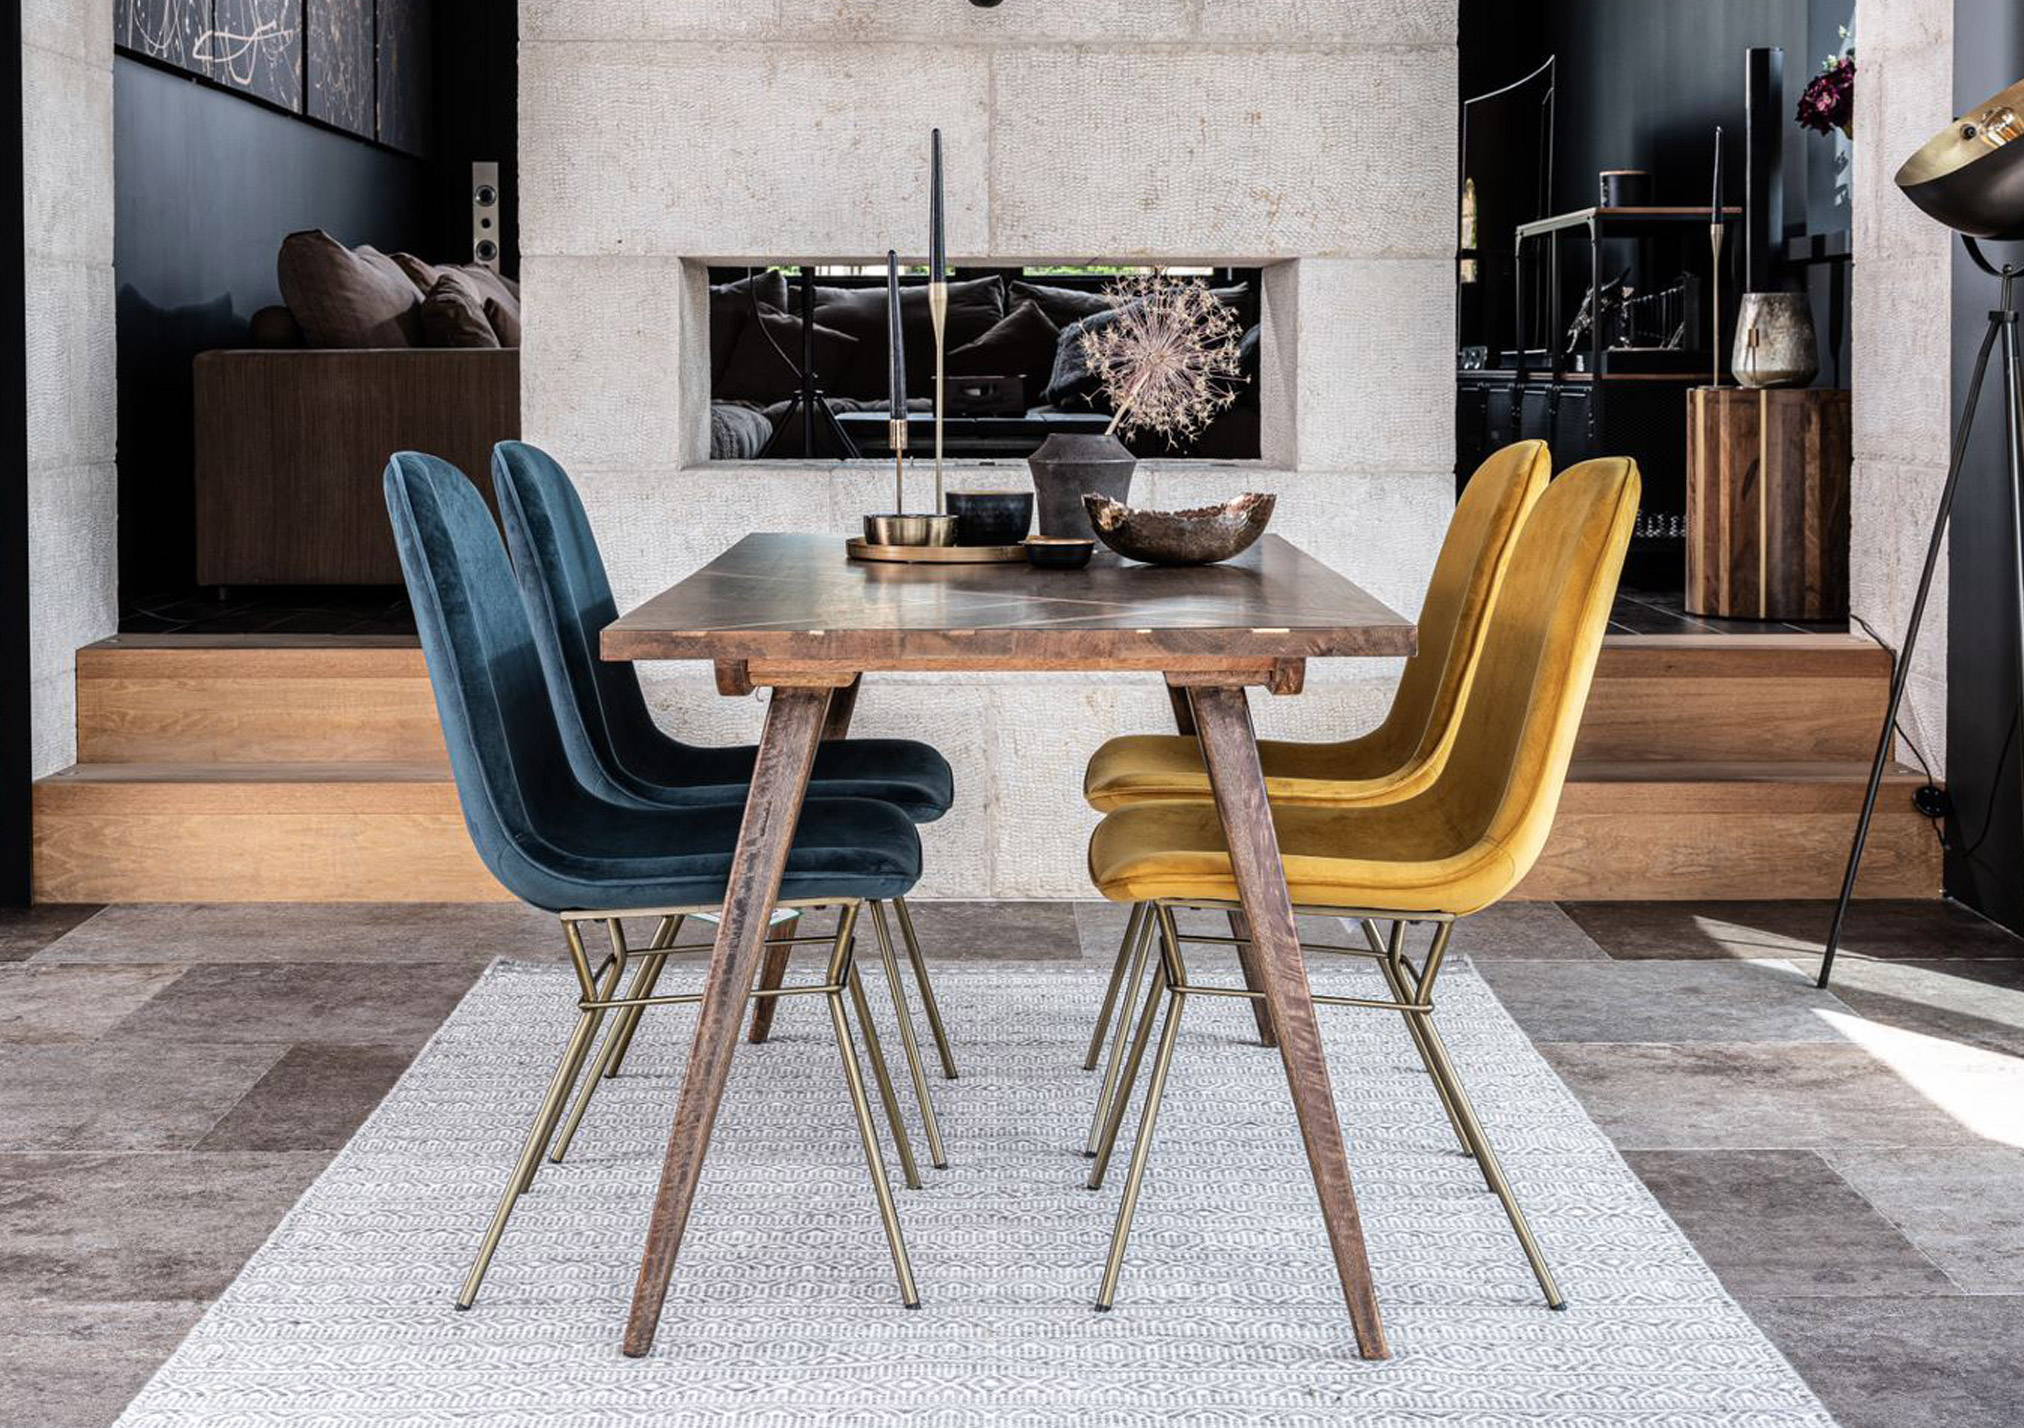 Mango Wood With Brass Metal Inlays - We Love The LittleThorpe Dining Furniture Collection